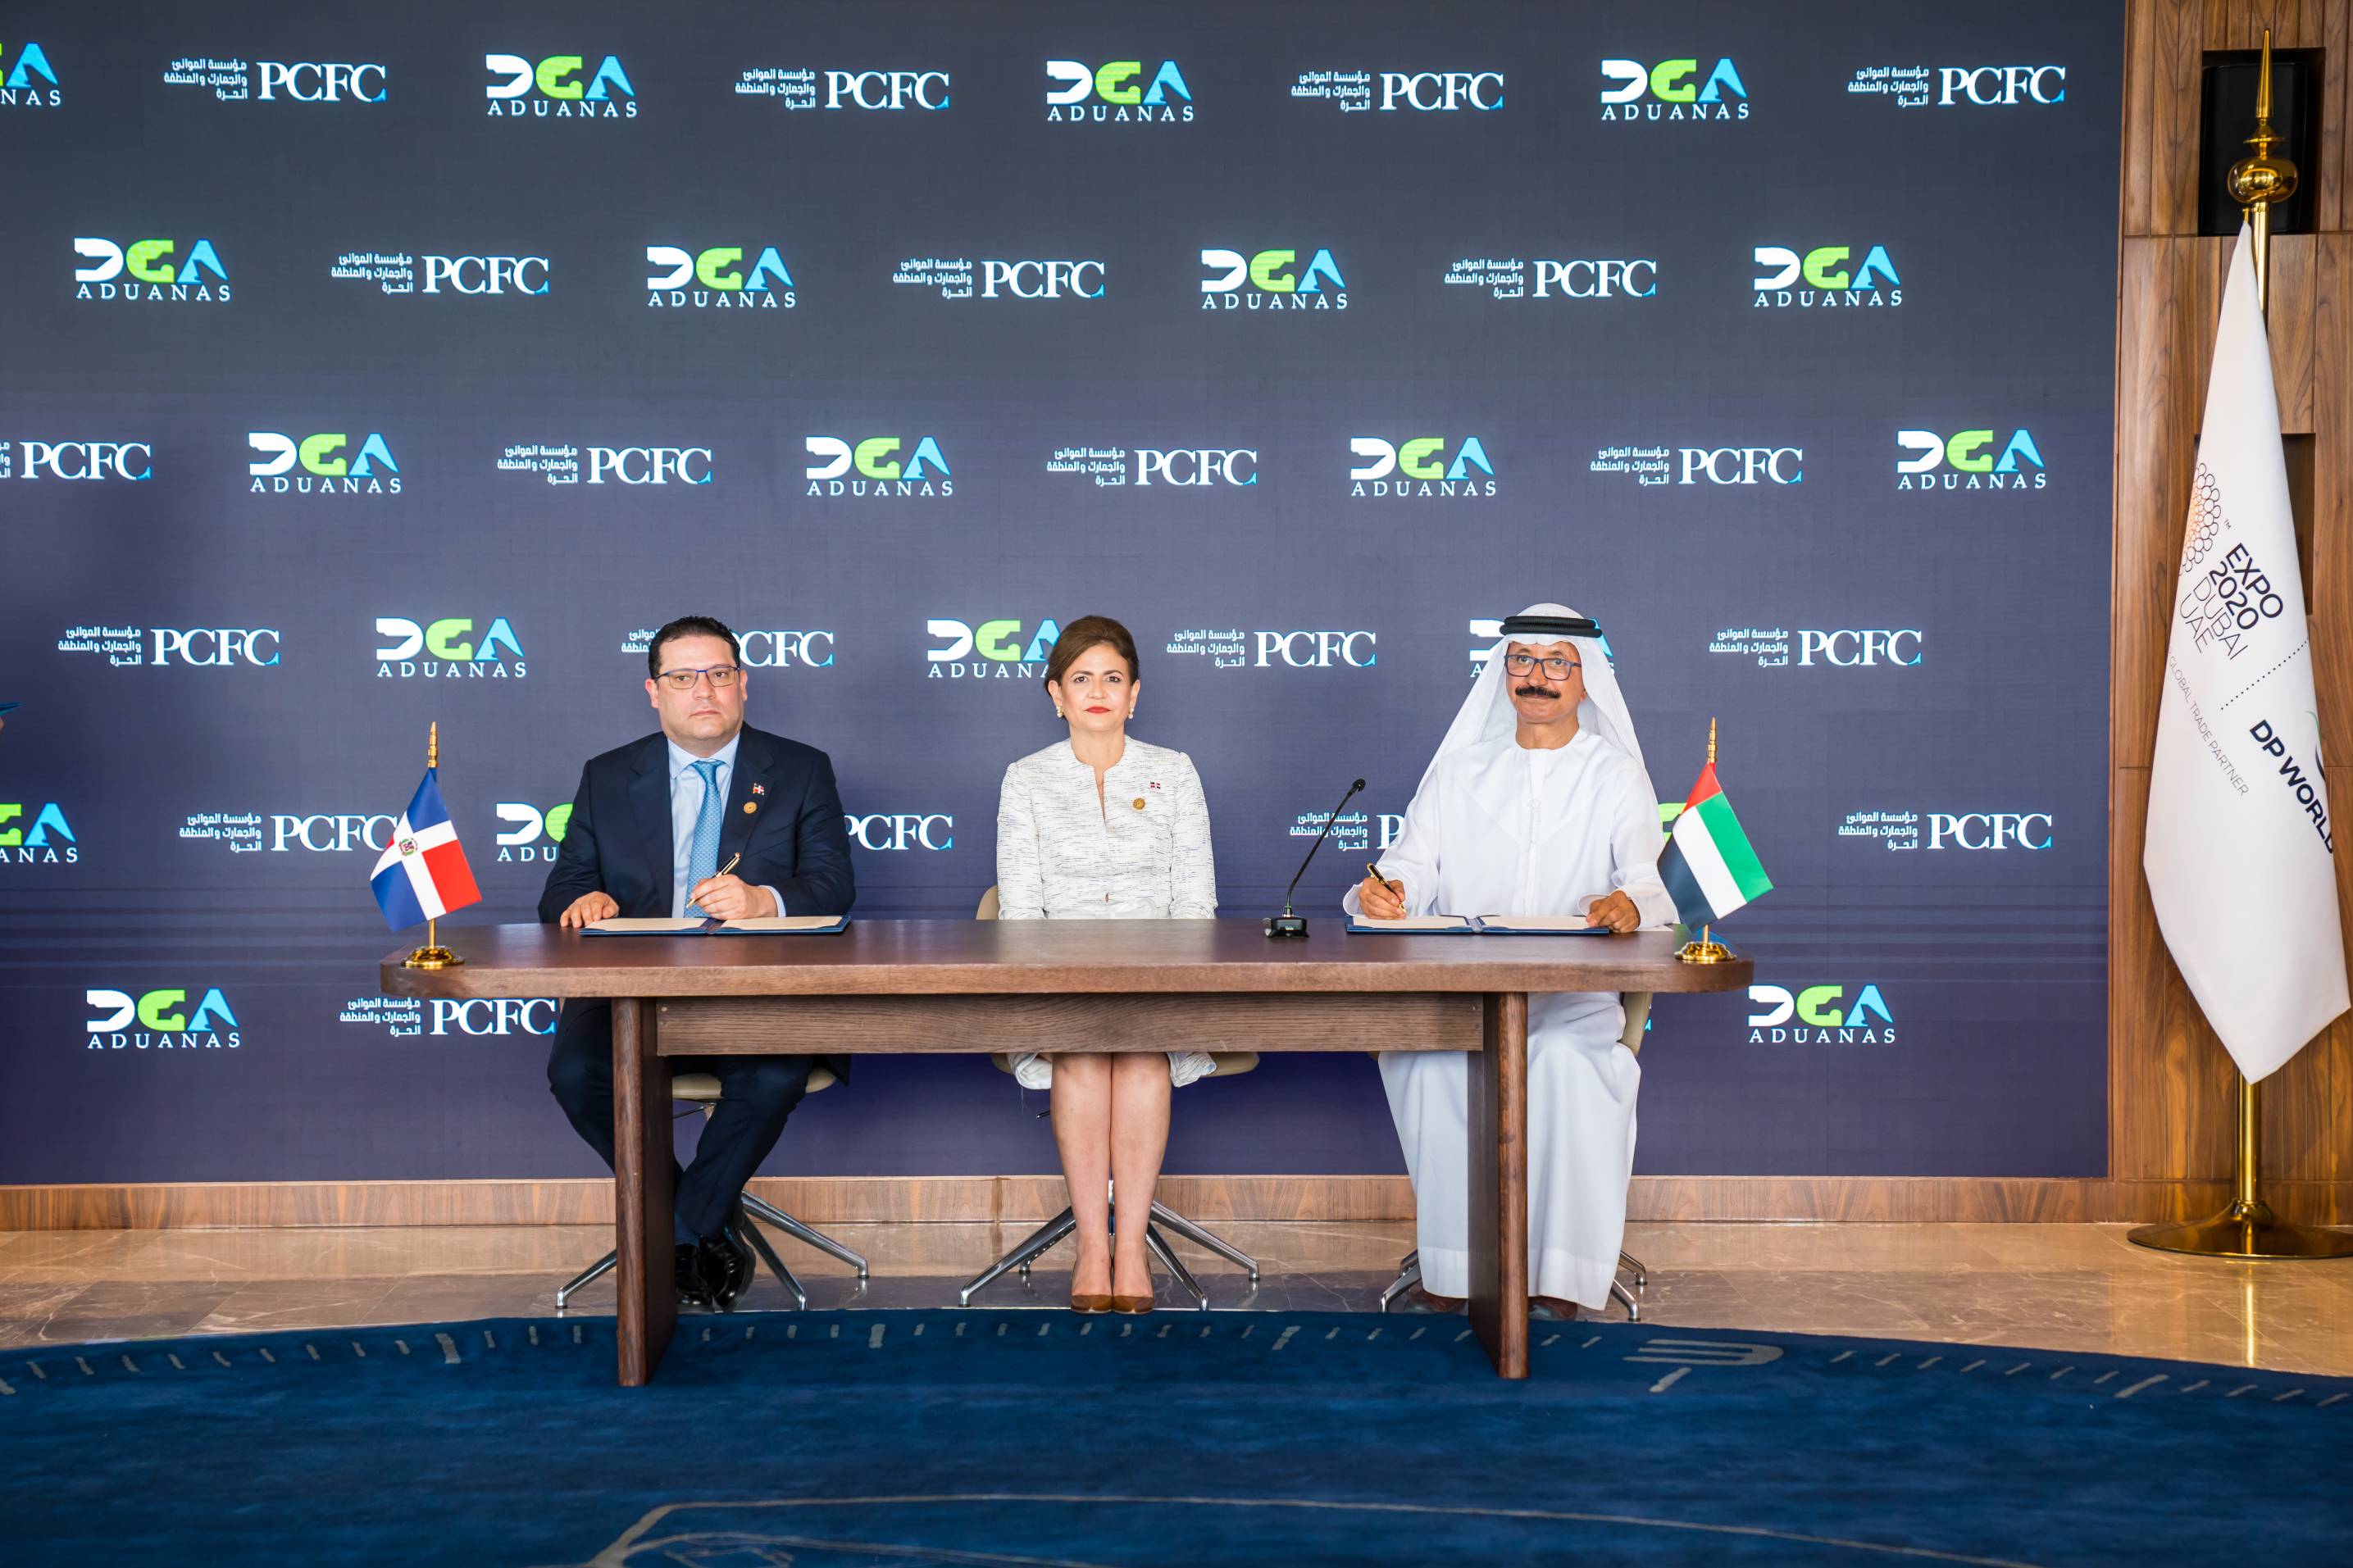 Dubai signs agreement with Dominican Republic to implement Customs Reform and Modernization Program